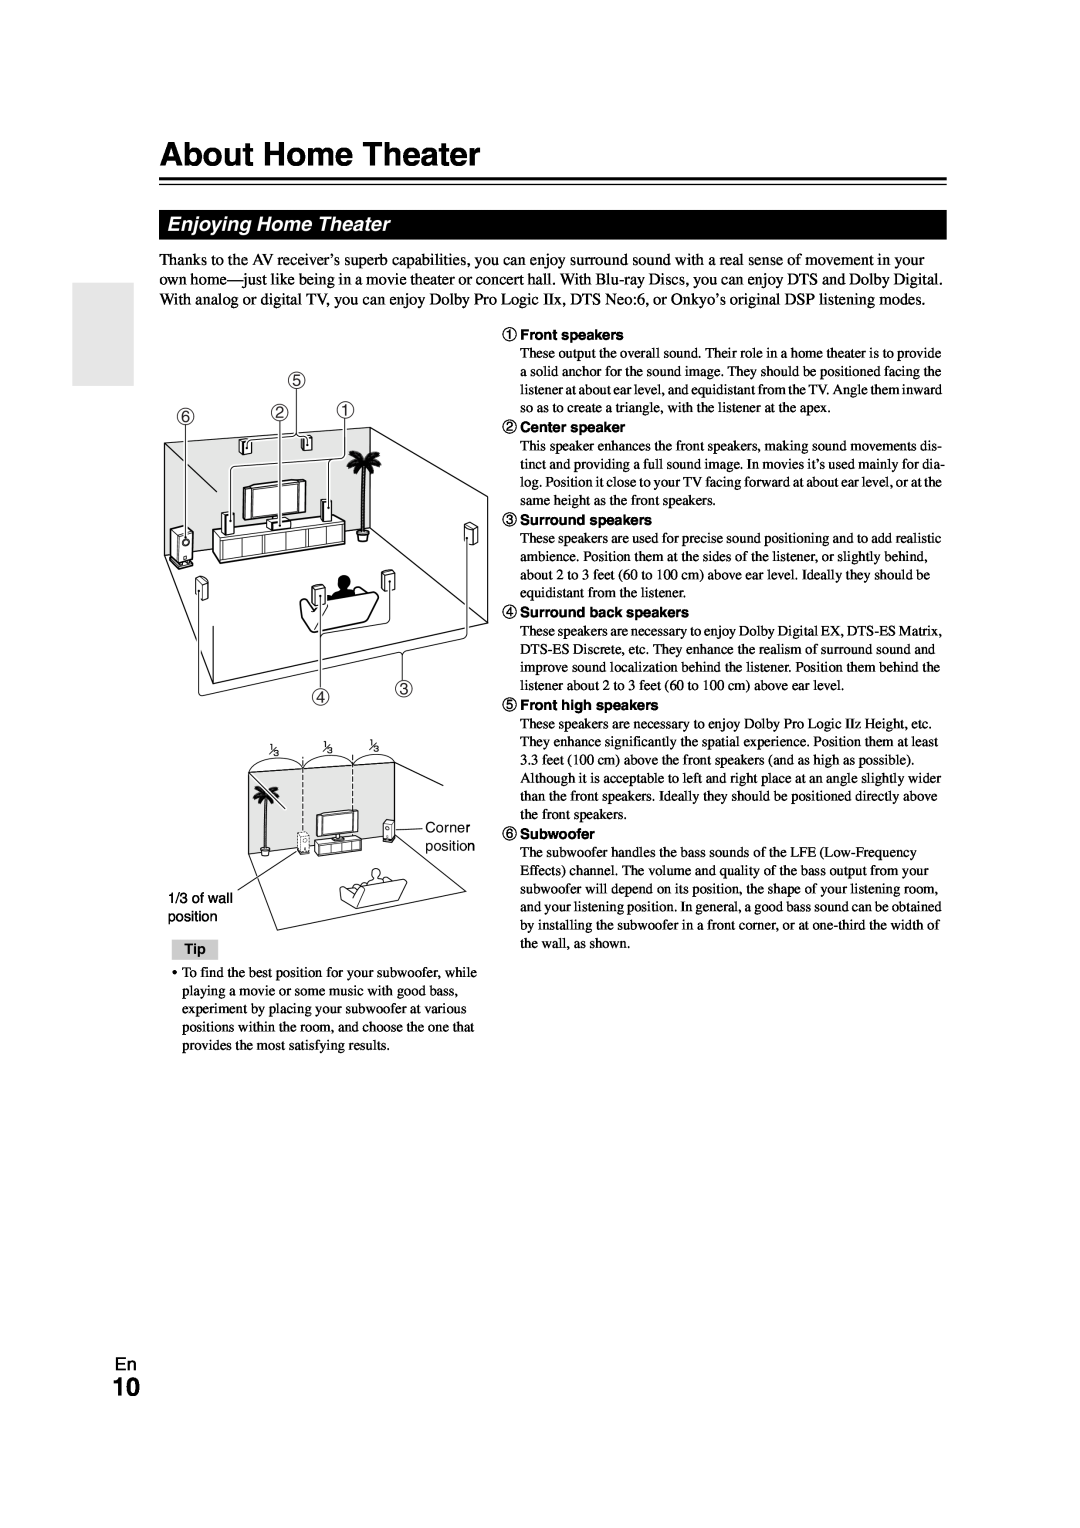 Onkyo TX-SR508 instruction manual About Home Theater, Enjoying Home Theater, e f b a 